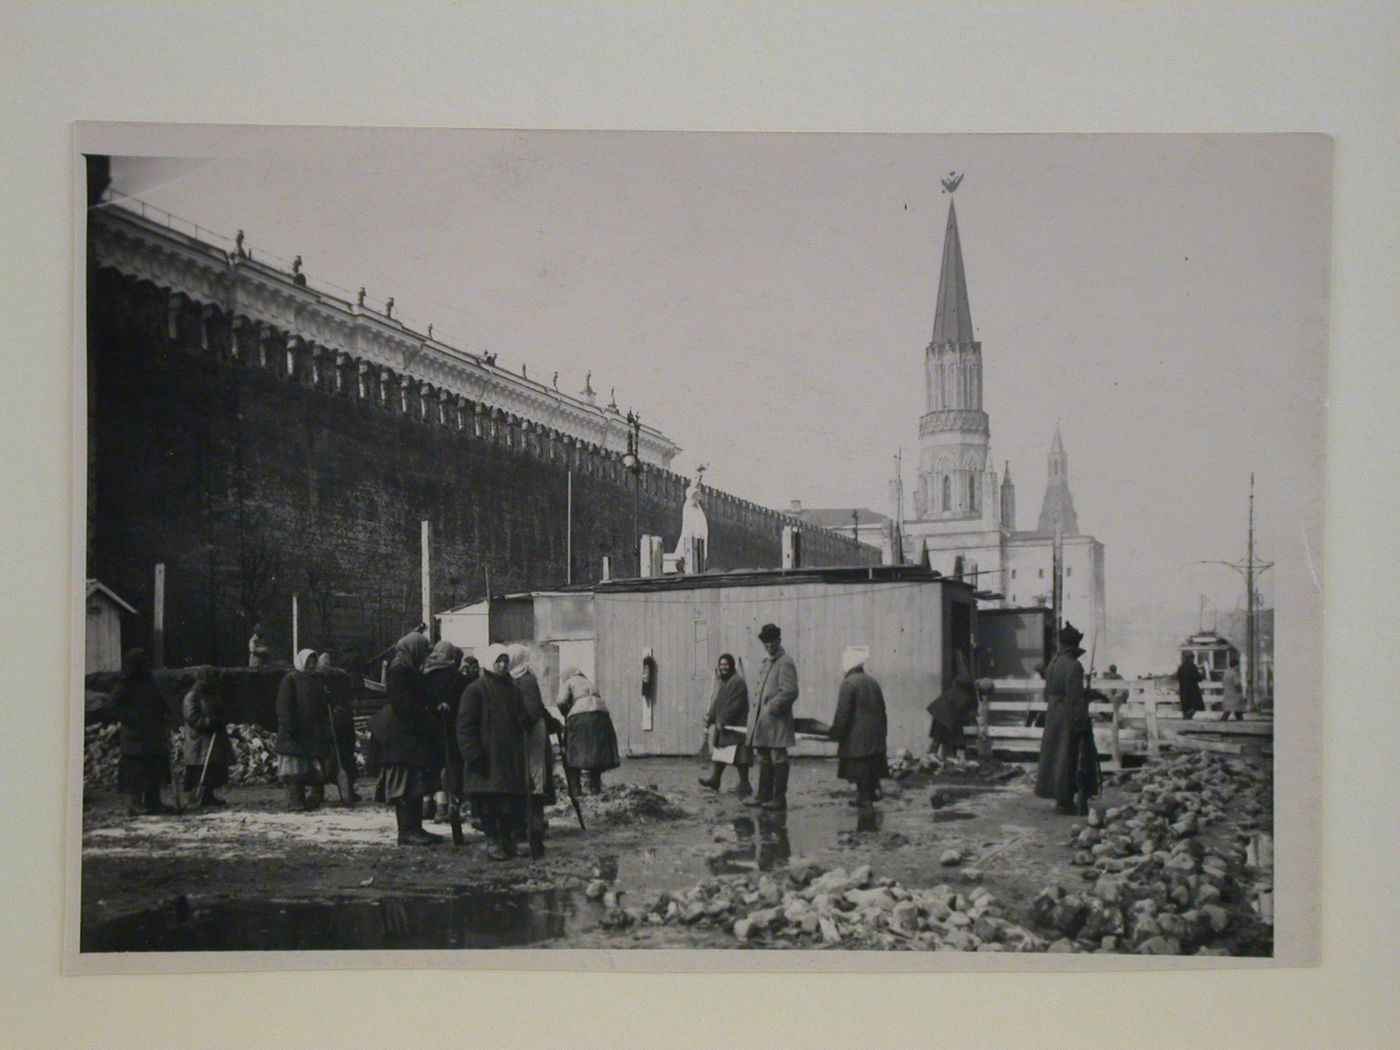 View of the construction site of the first wooden Lenin Mausoleum, showing women workers in the foreground, the access wings of the mausoleum and a monument in the centre, and the Nikol'skaia Tower (Nicholas Tower) in the background, Red Square, Moscow